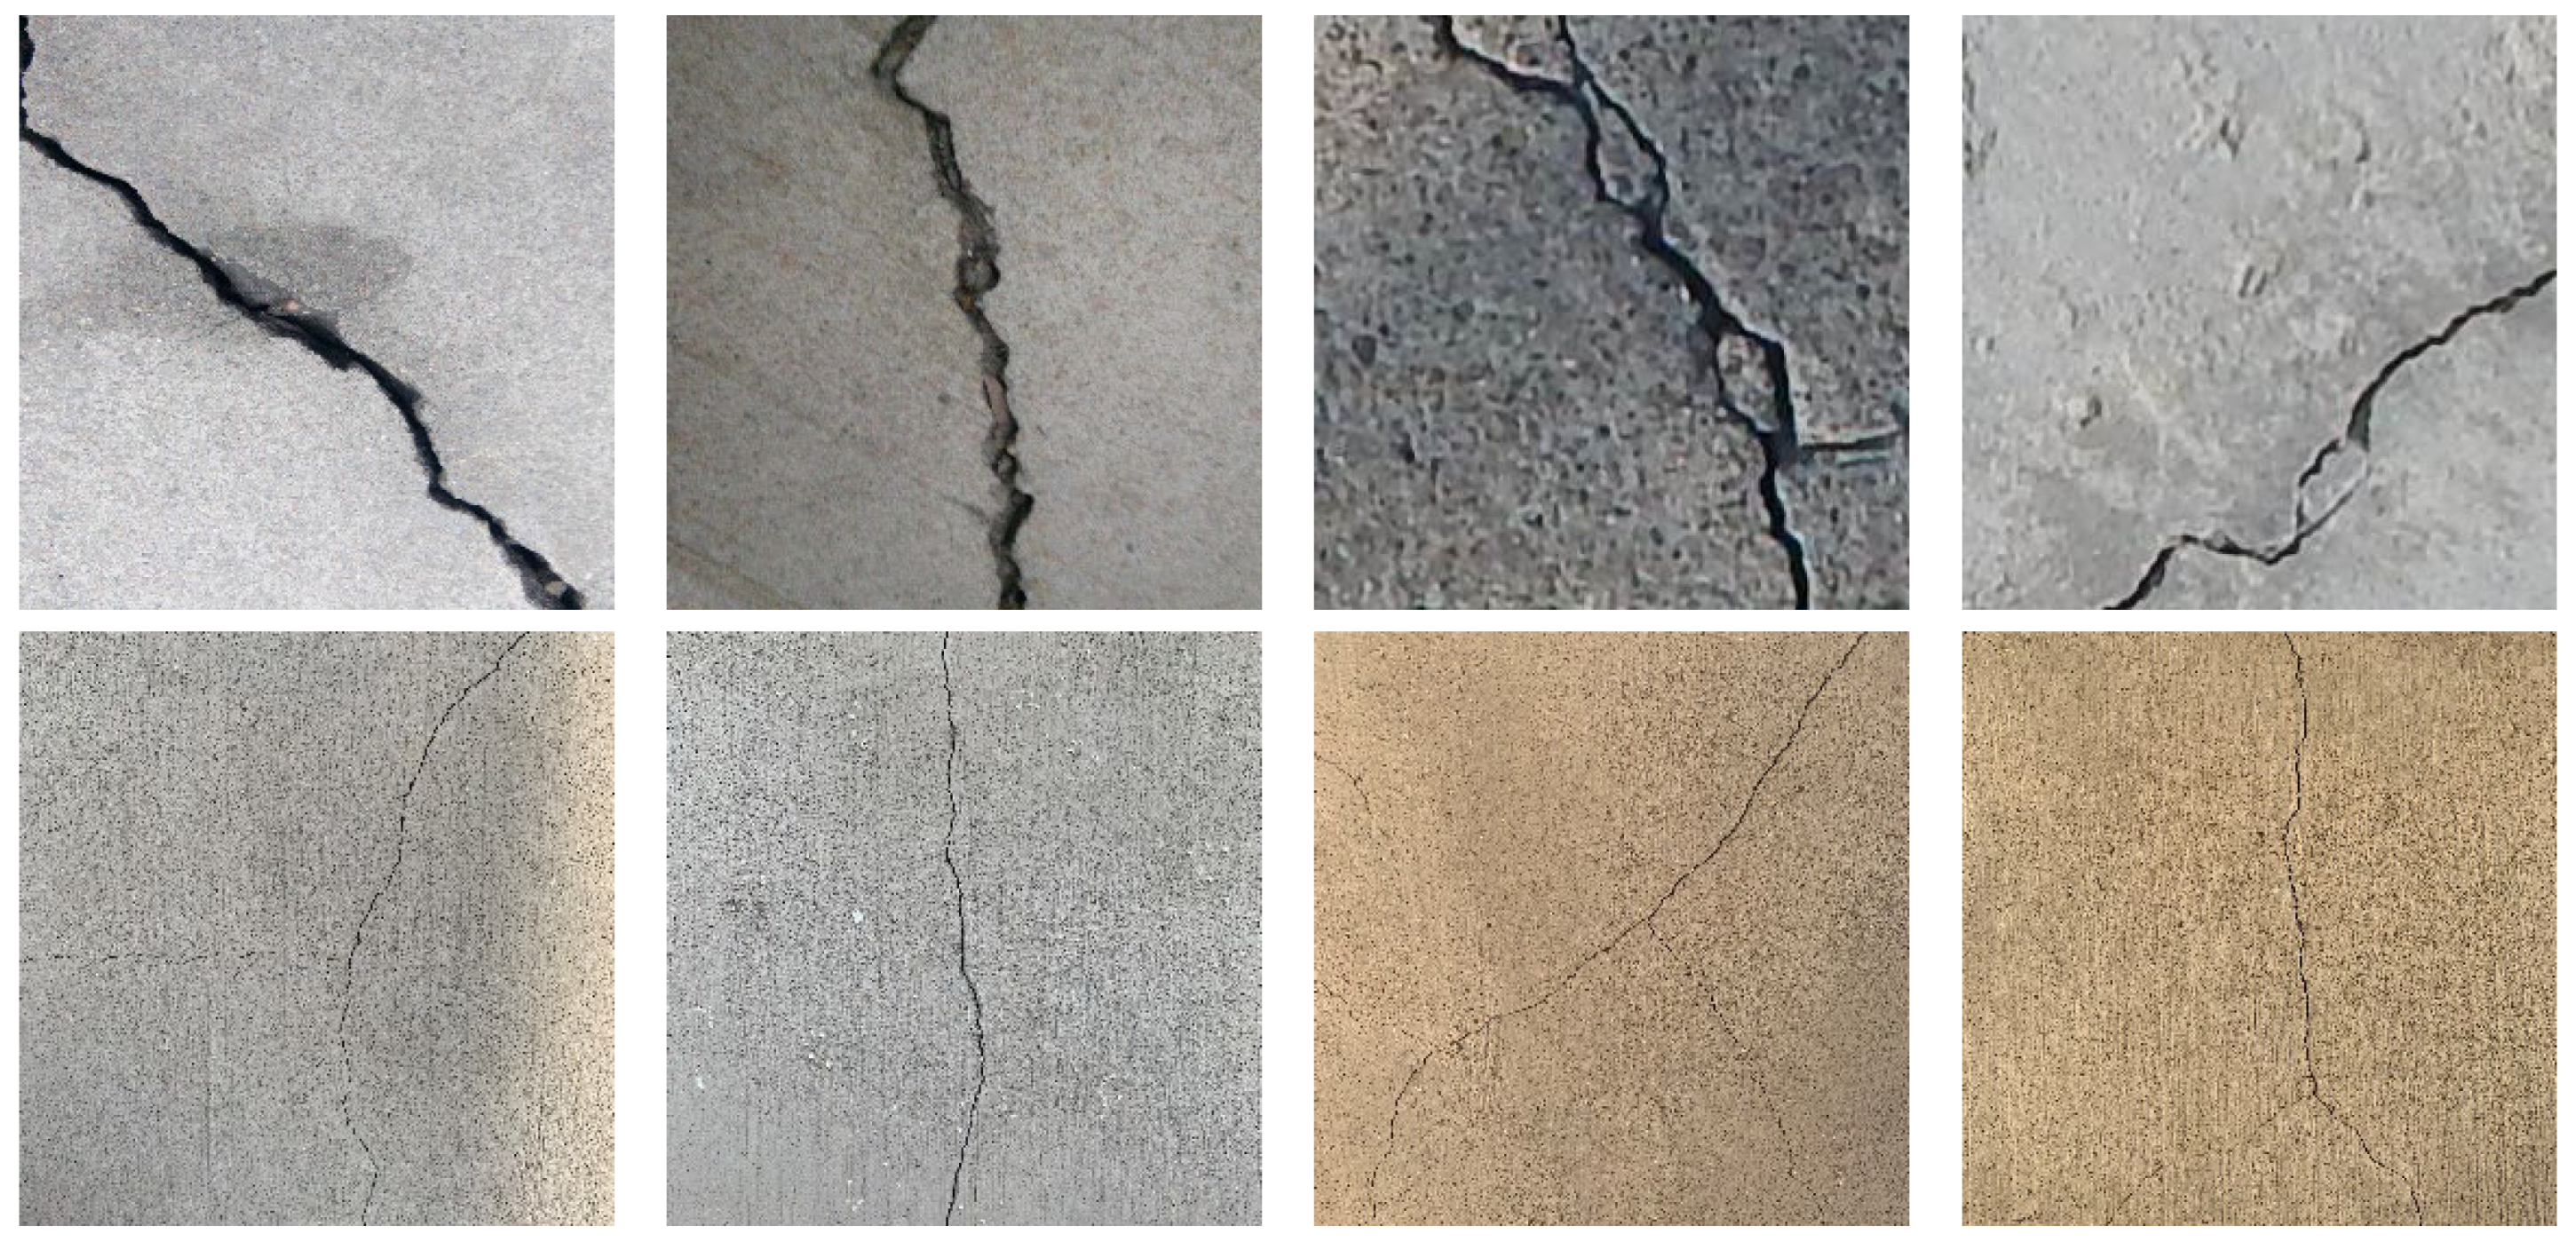 Examples of Cracks in Structures